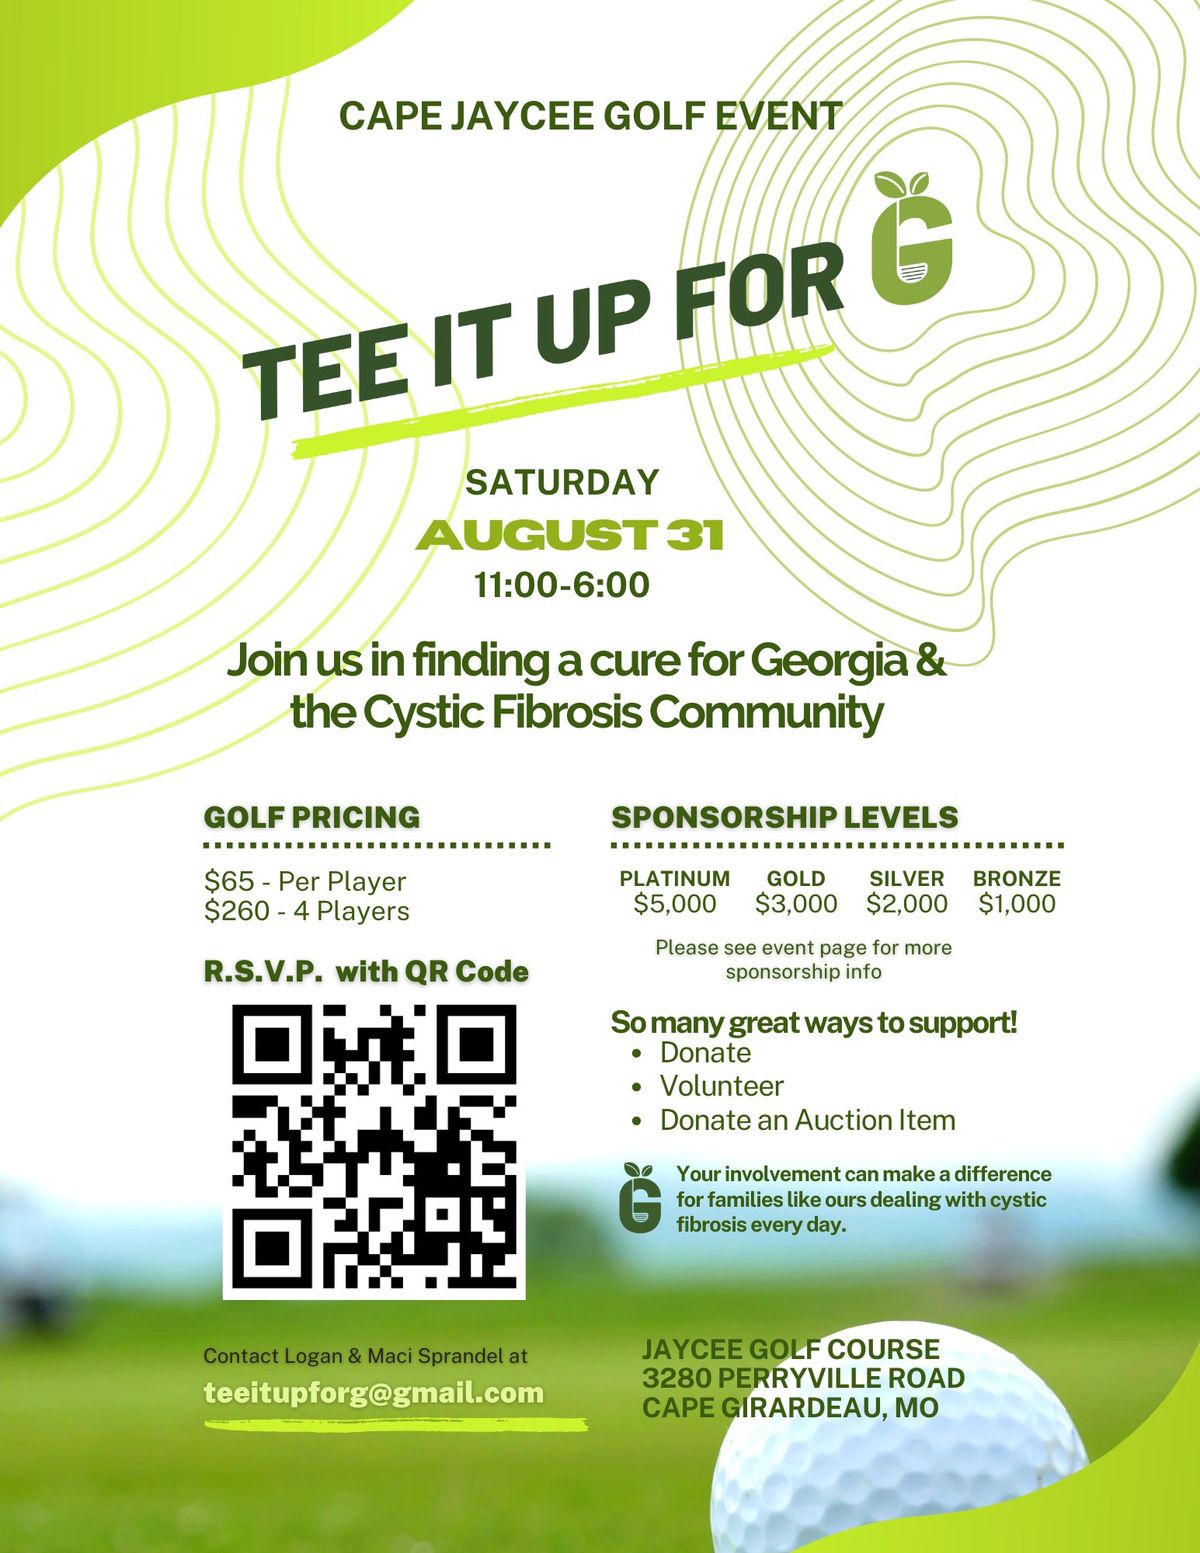 Tee it up for G: Chipping away at a Cure!